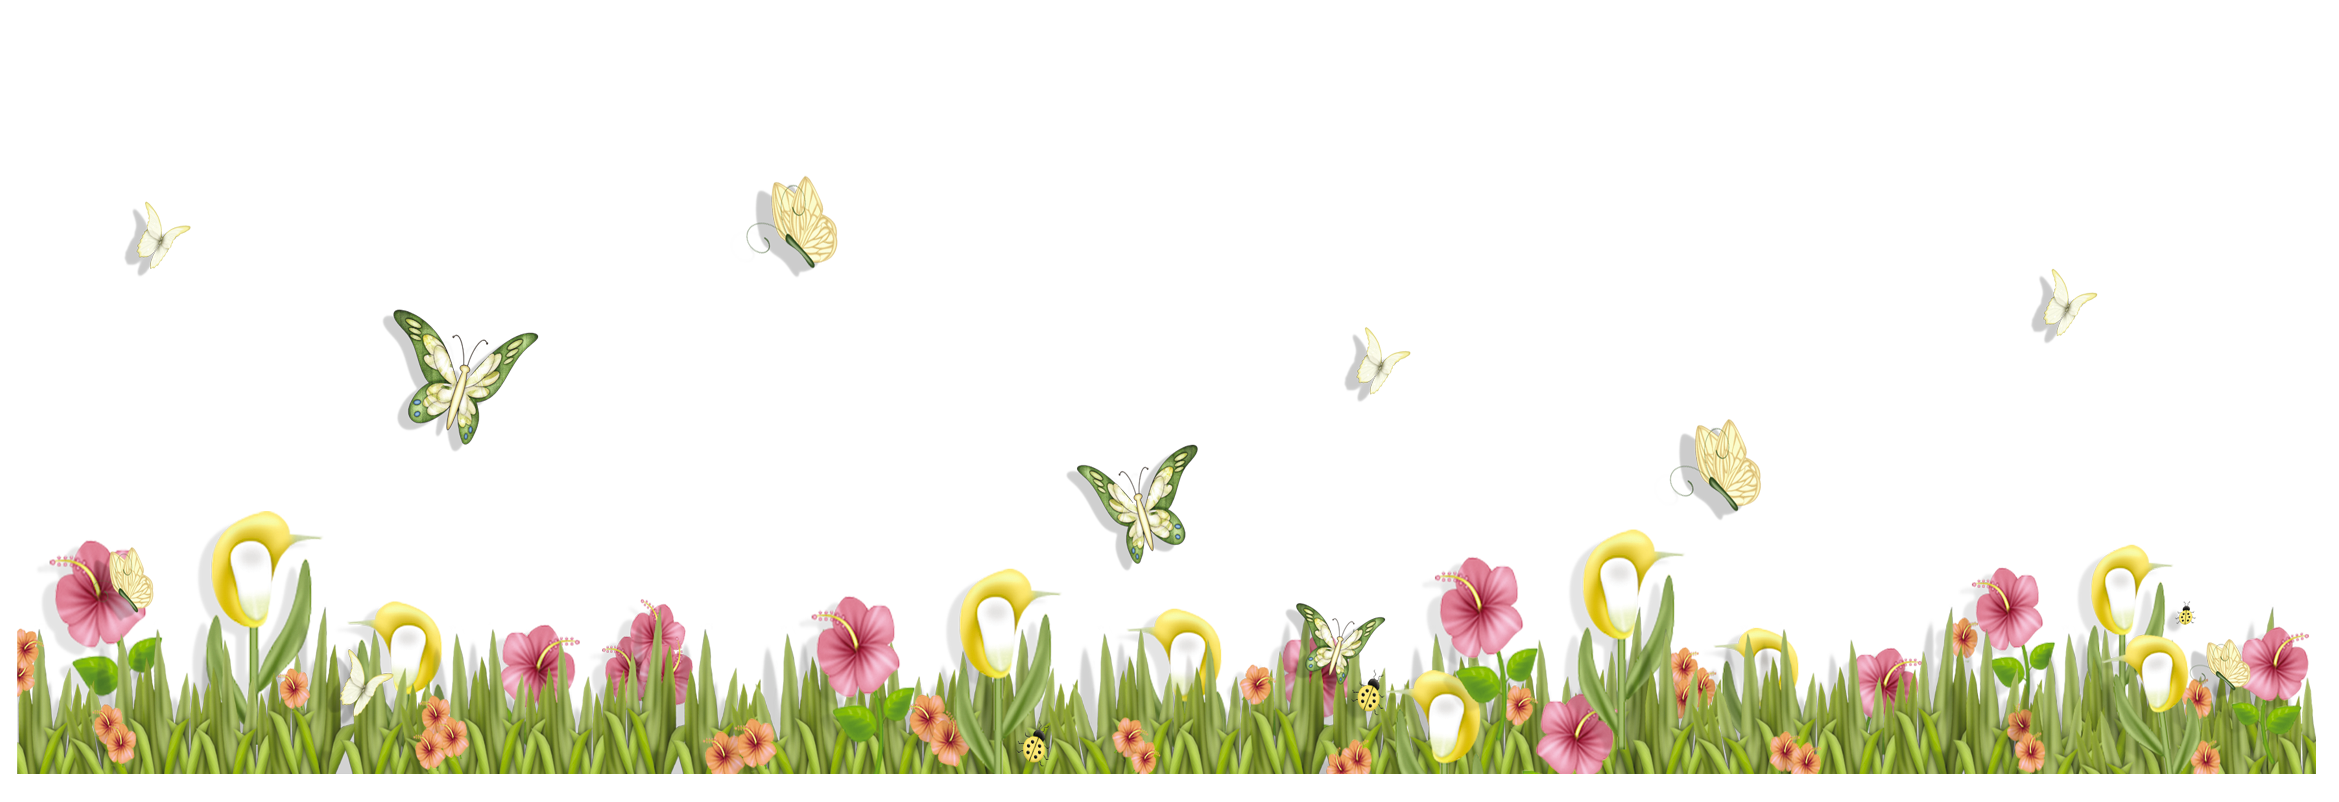 Grass with Butterflies and Flowers PNG Clipart